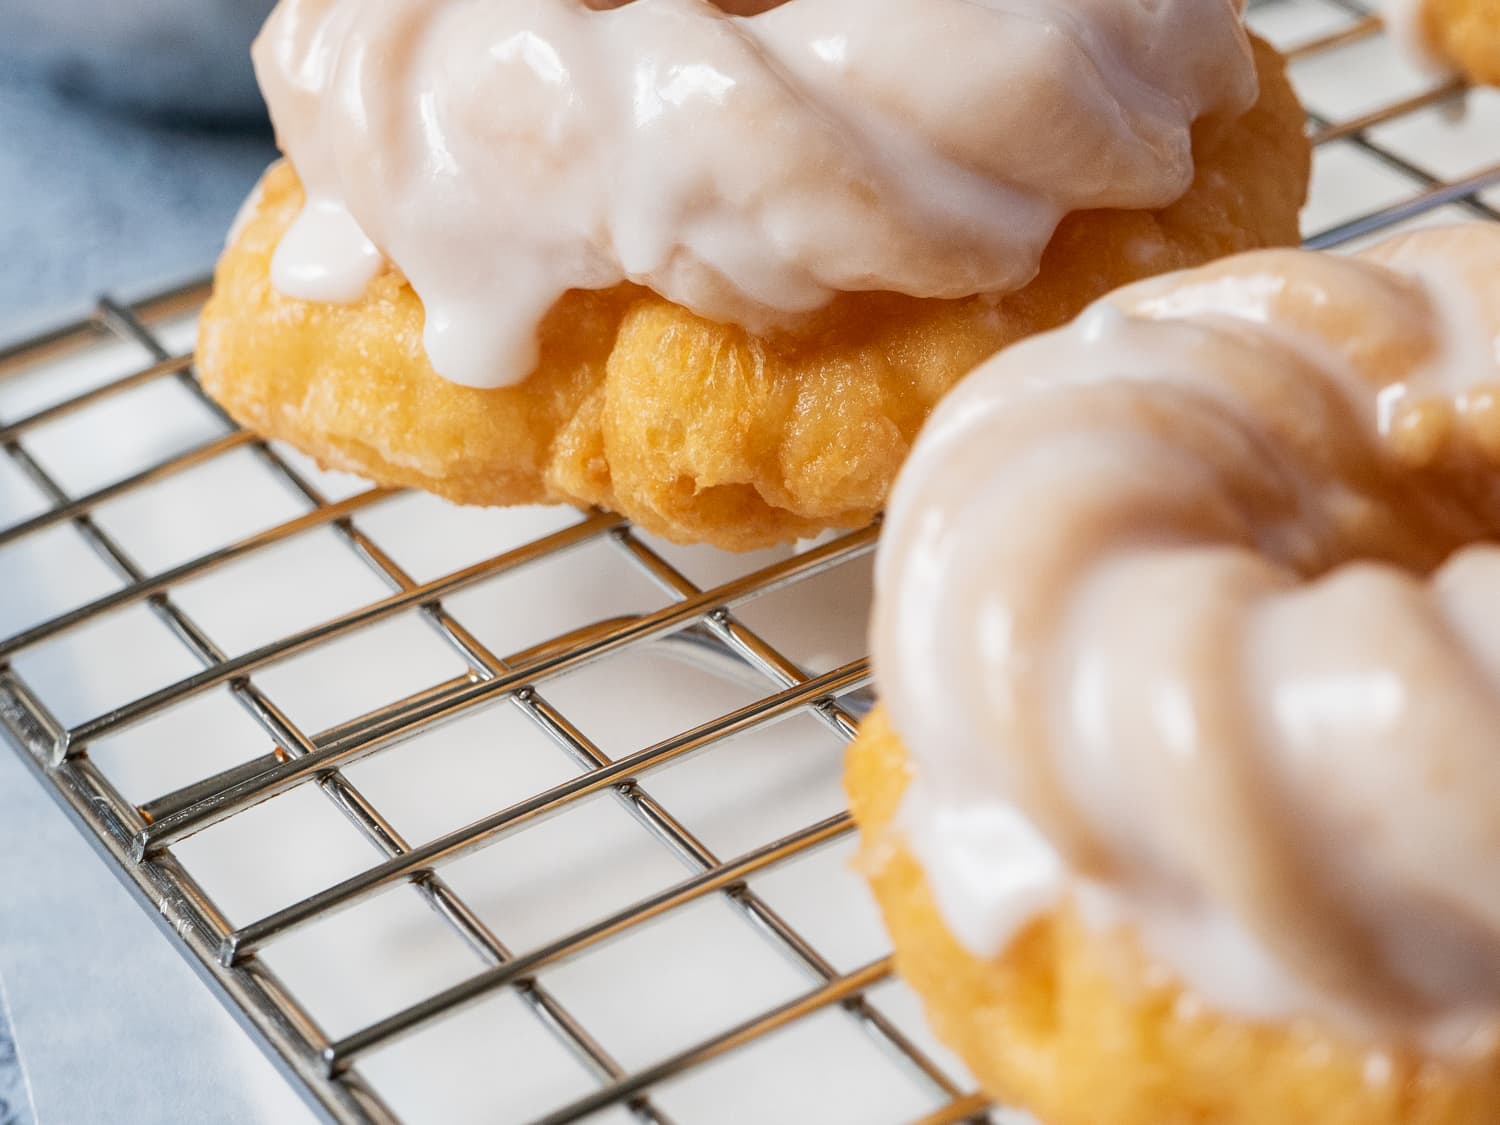 Easy Donut Glaze Recipe - from Somewhat Simple